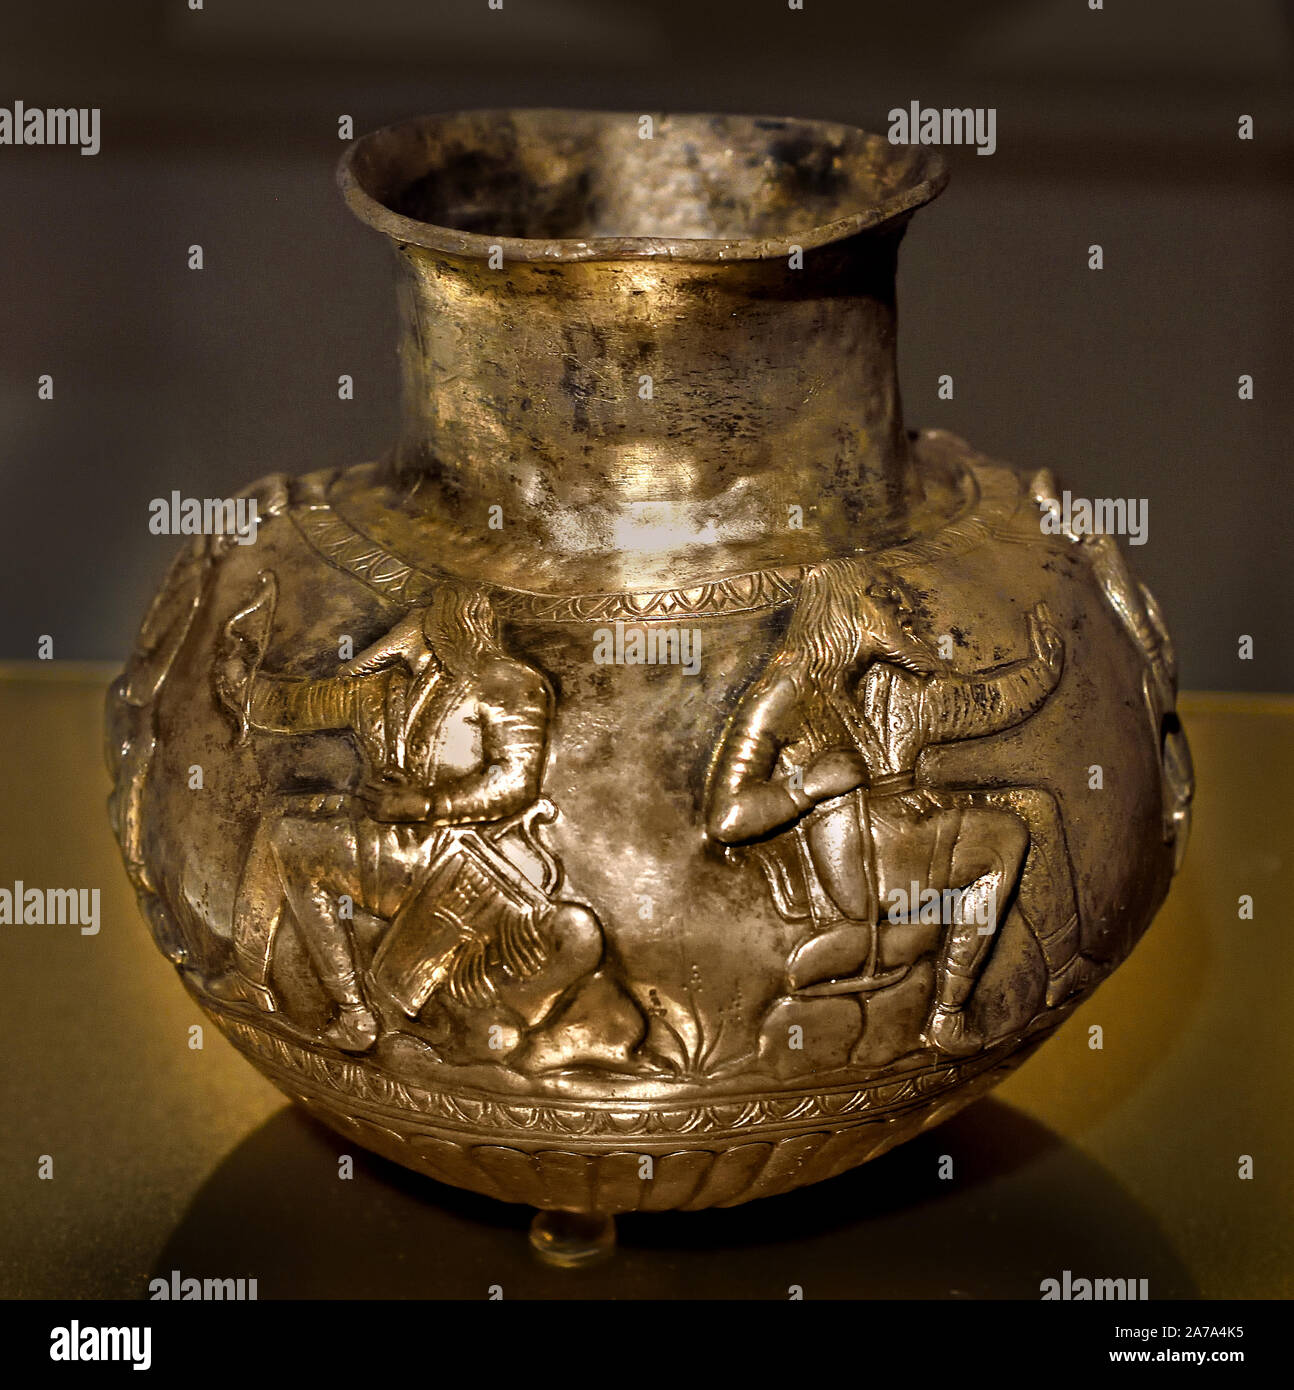 Cultic vessel (silver) with Scythians from Voronezh Oblast, Central Russia, 4thc BC,  Hermitage Museum ( The scene depicted myths and legends about the origins of the Scythian kings, Hermitage, Don Basin  Russia, Russian. Stock Photo